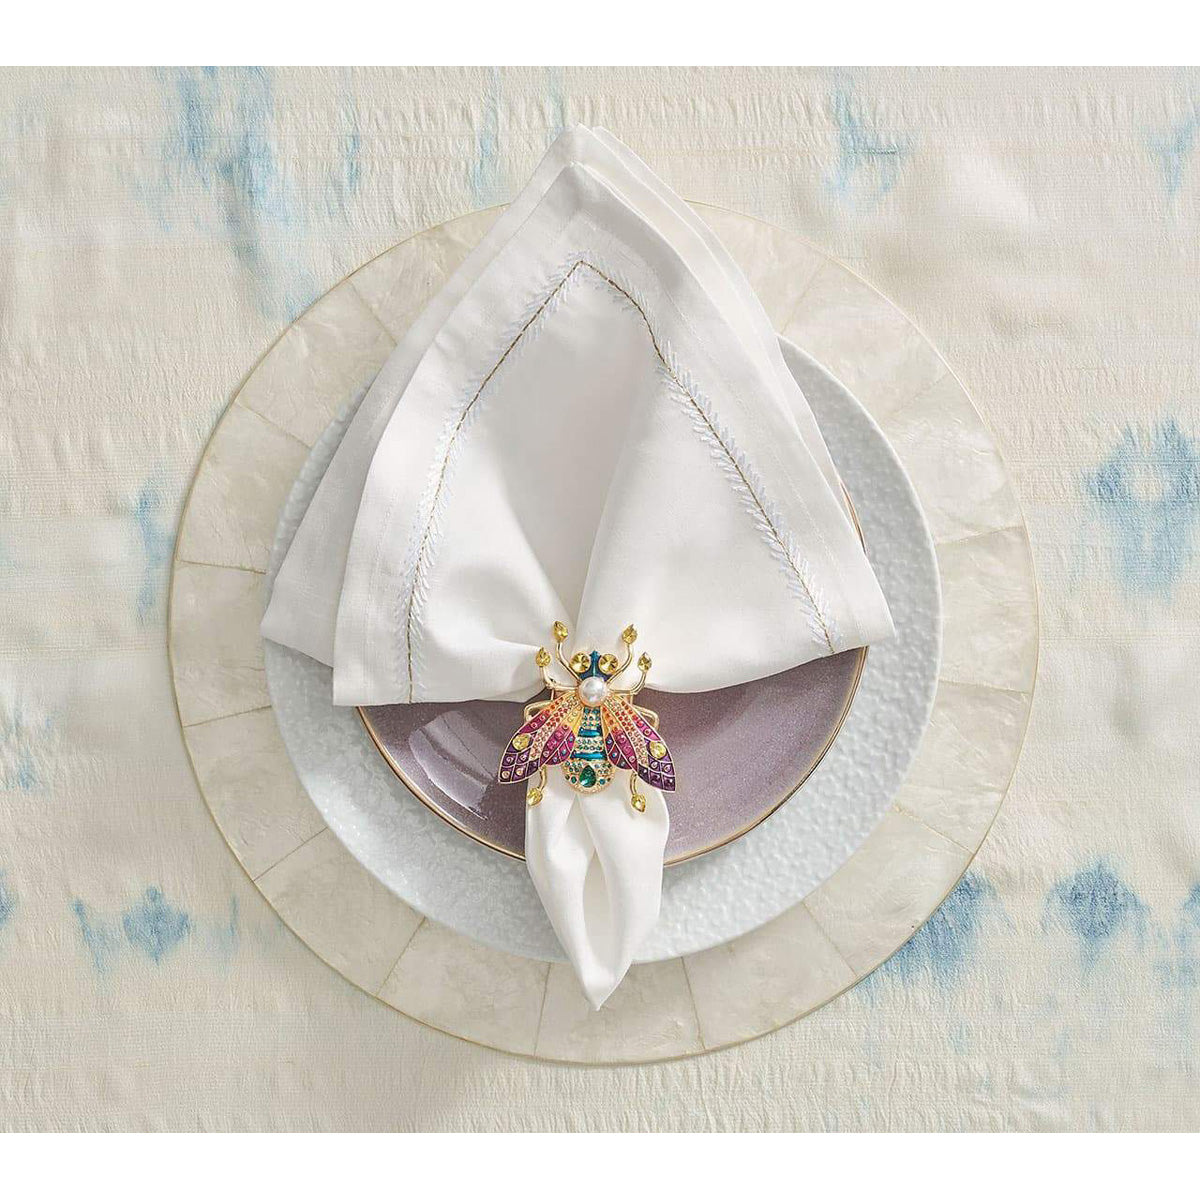 Glam Fly Napkin Ring - Set of 4 in a Gift Box by Kim Seybert Additional Image-6